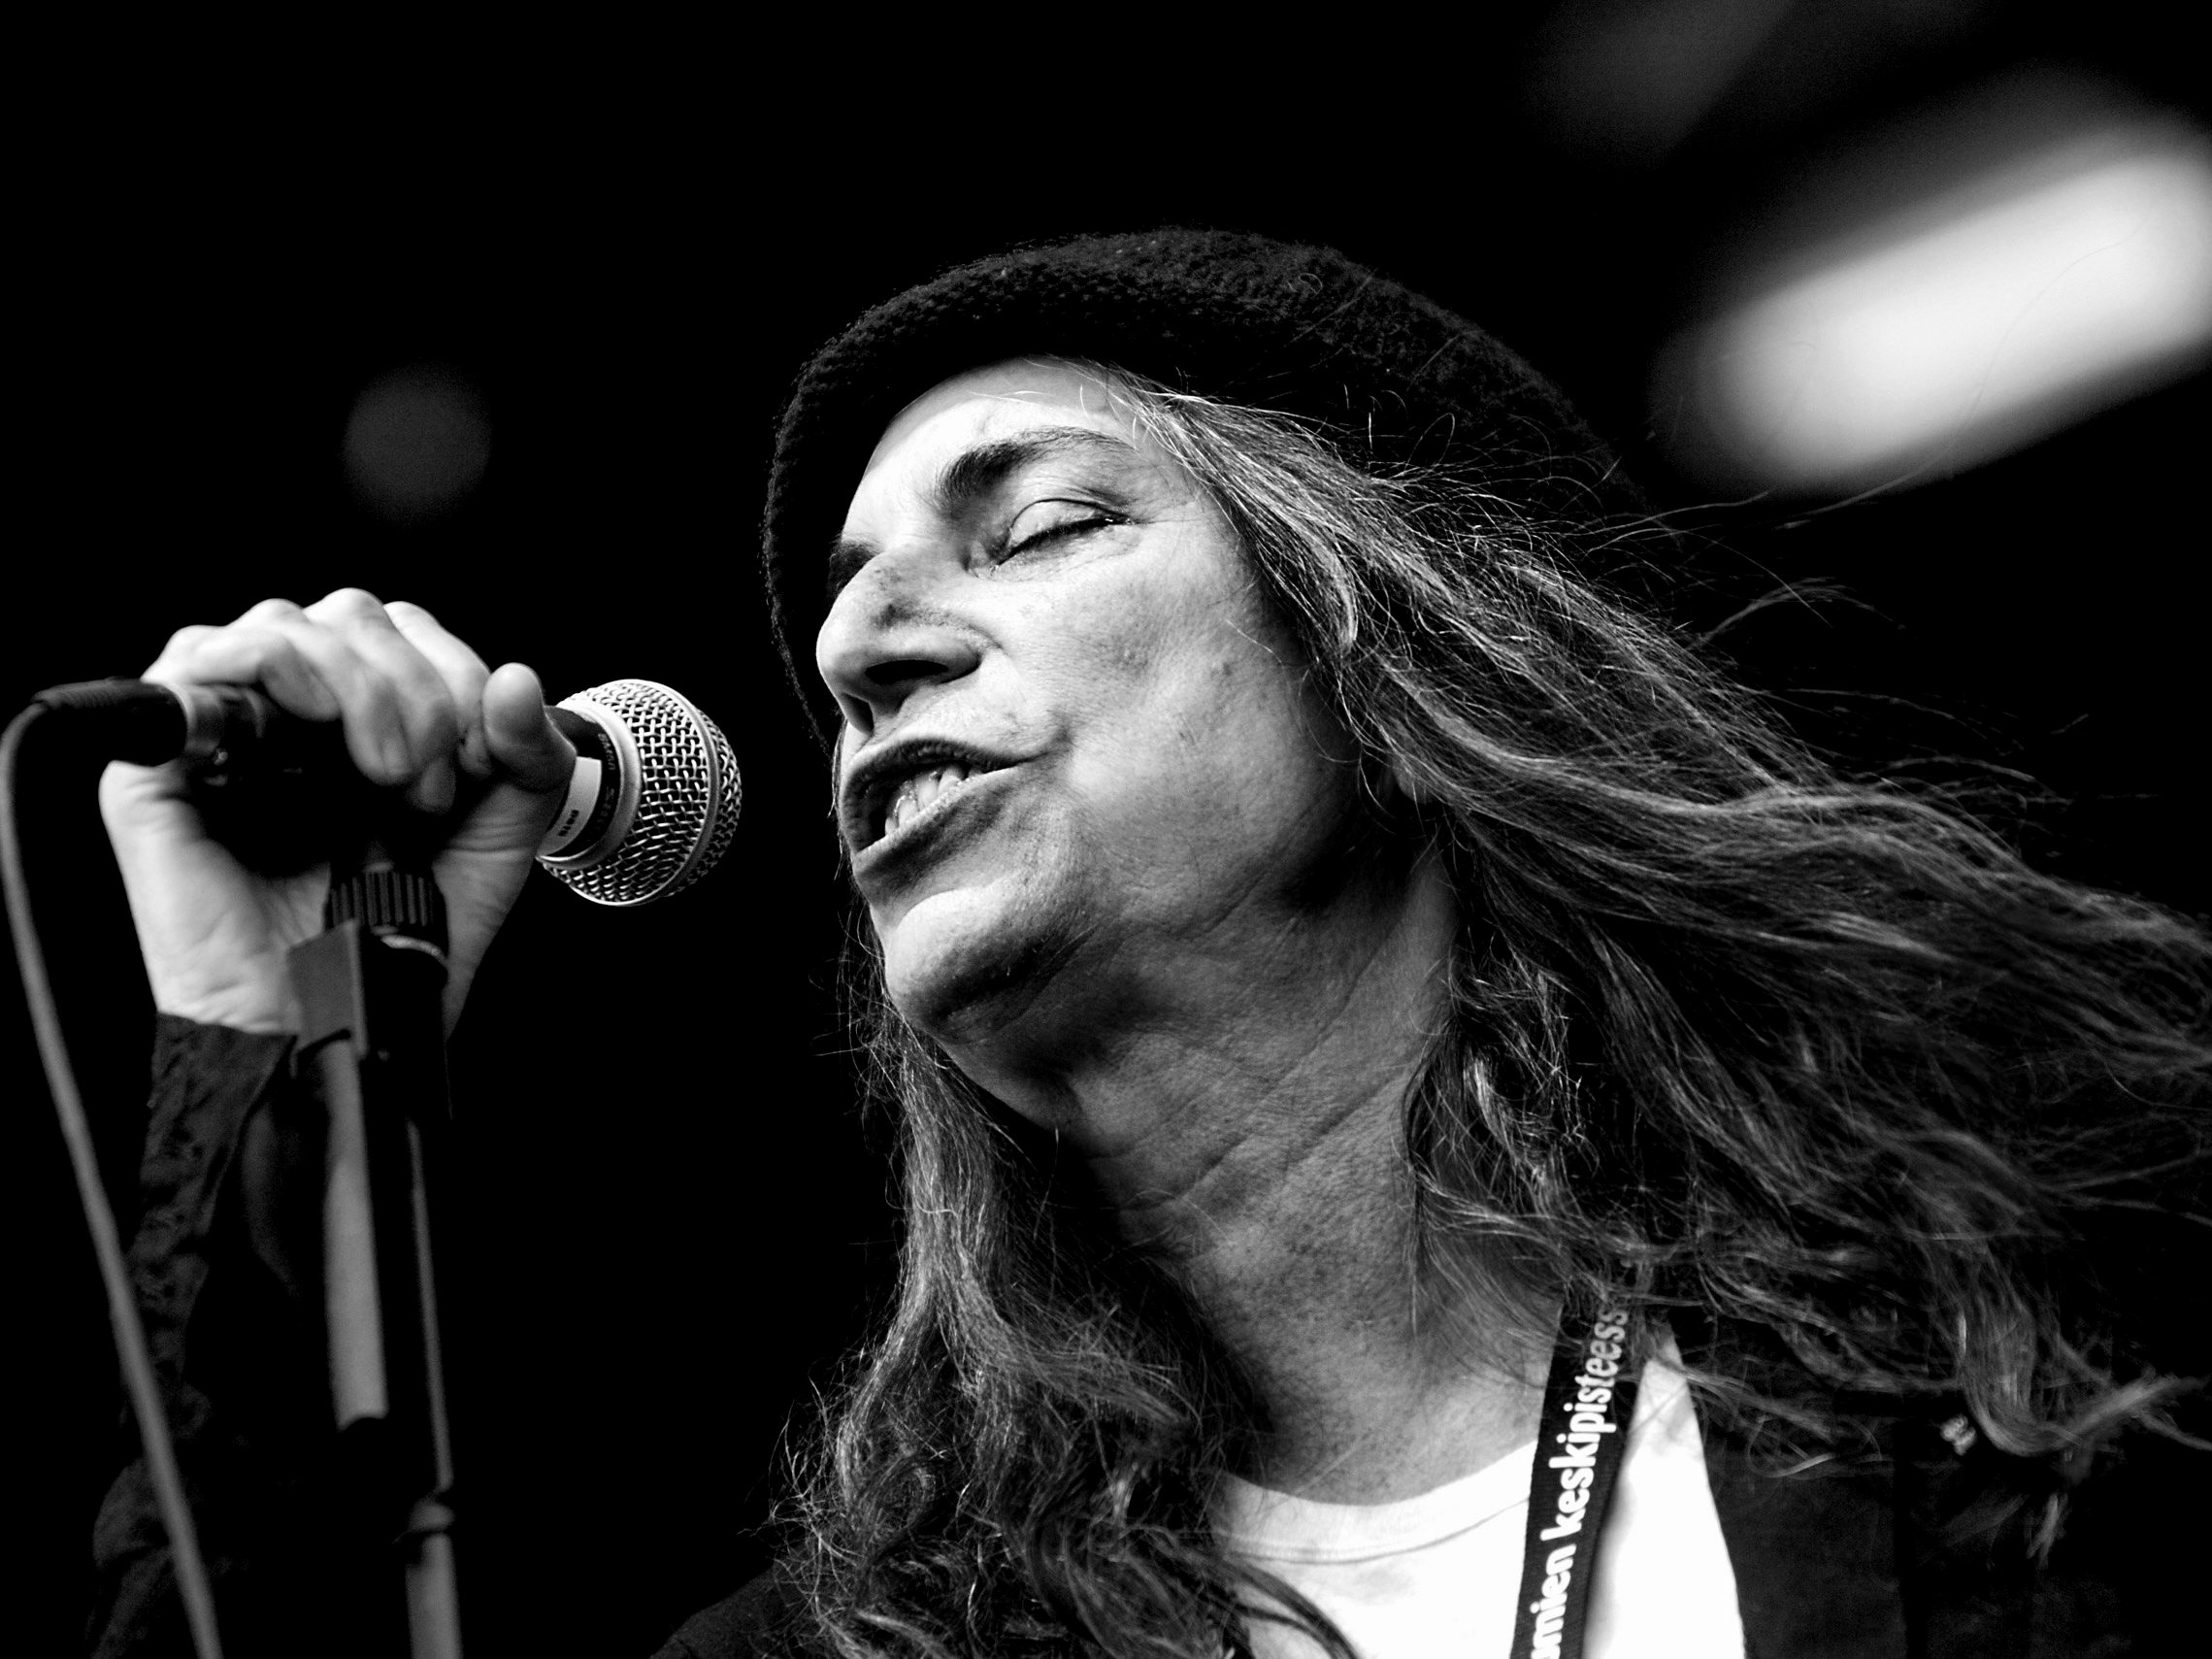 Patti_Smith_performing_in_Finland,_2007.jpg